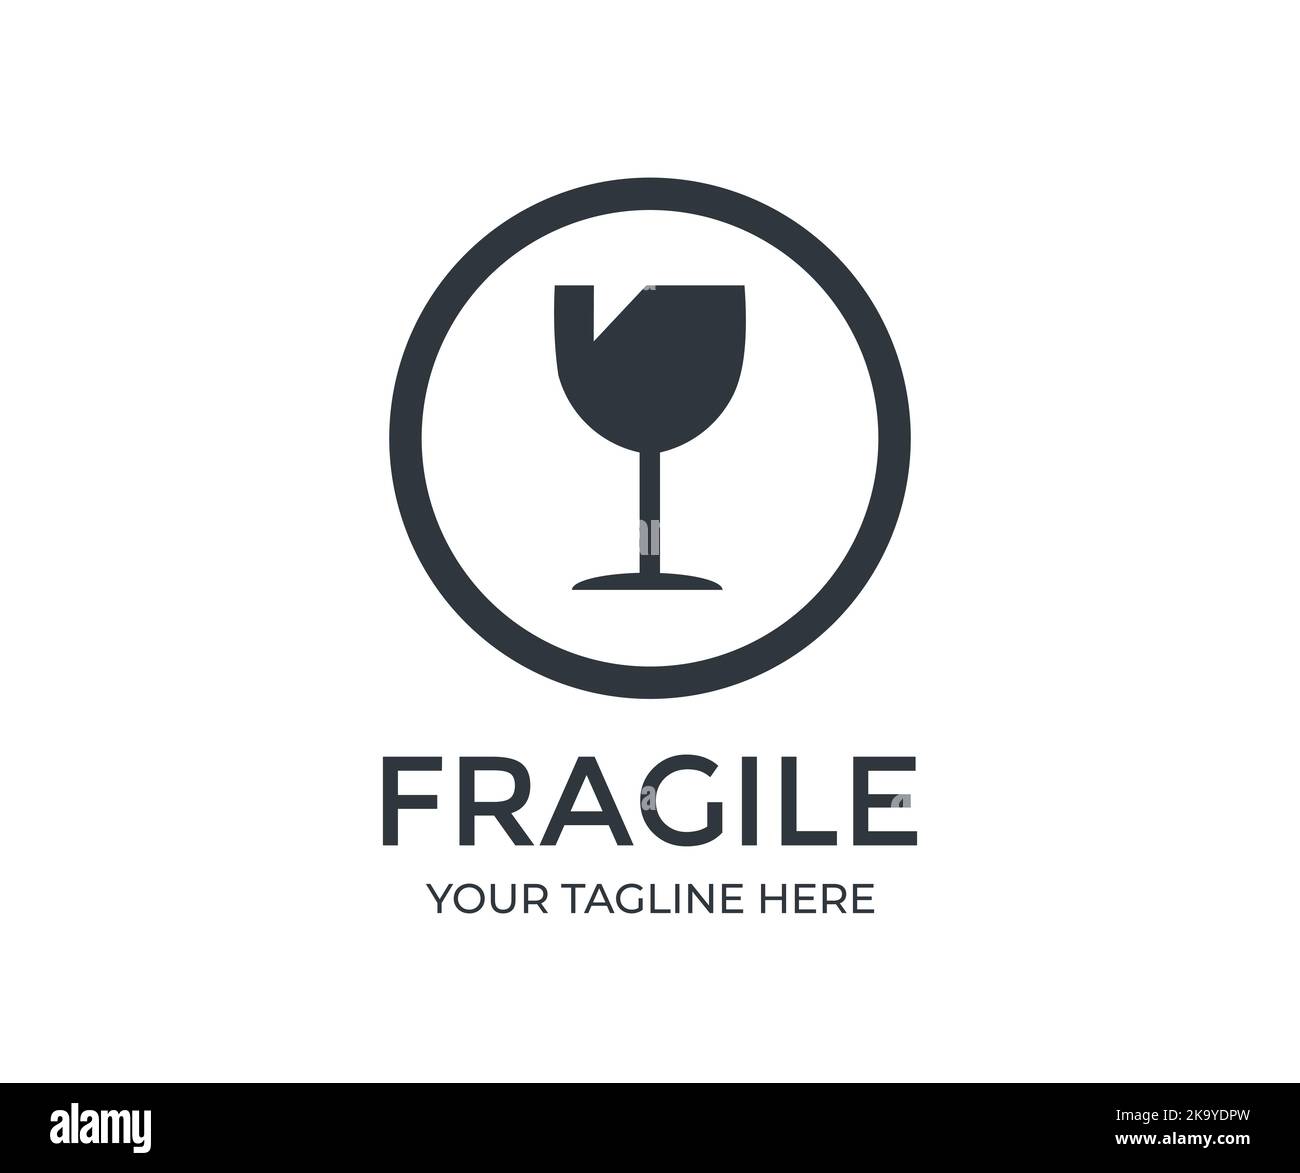 Fragile package icon logo design. Handle with care logistics and delivery shipping labels, fragile box, cargo warning  vector design and illustration. Stock Vector